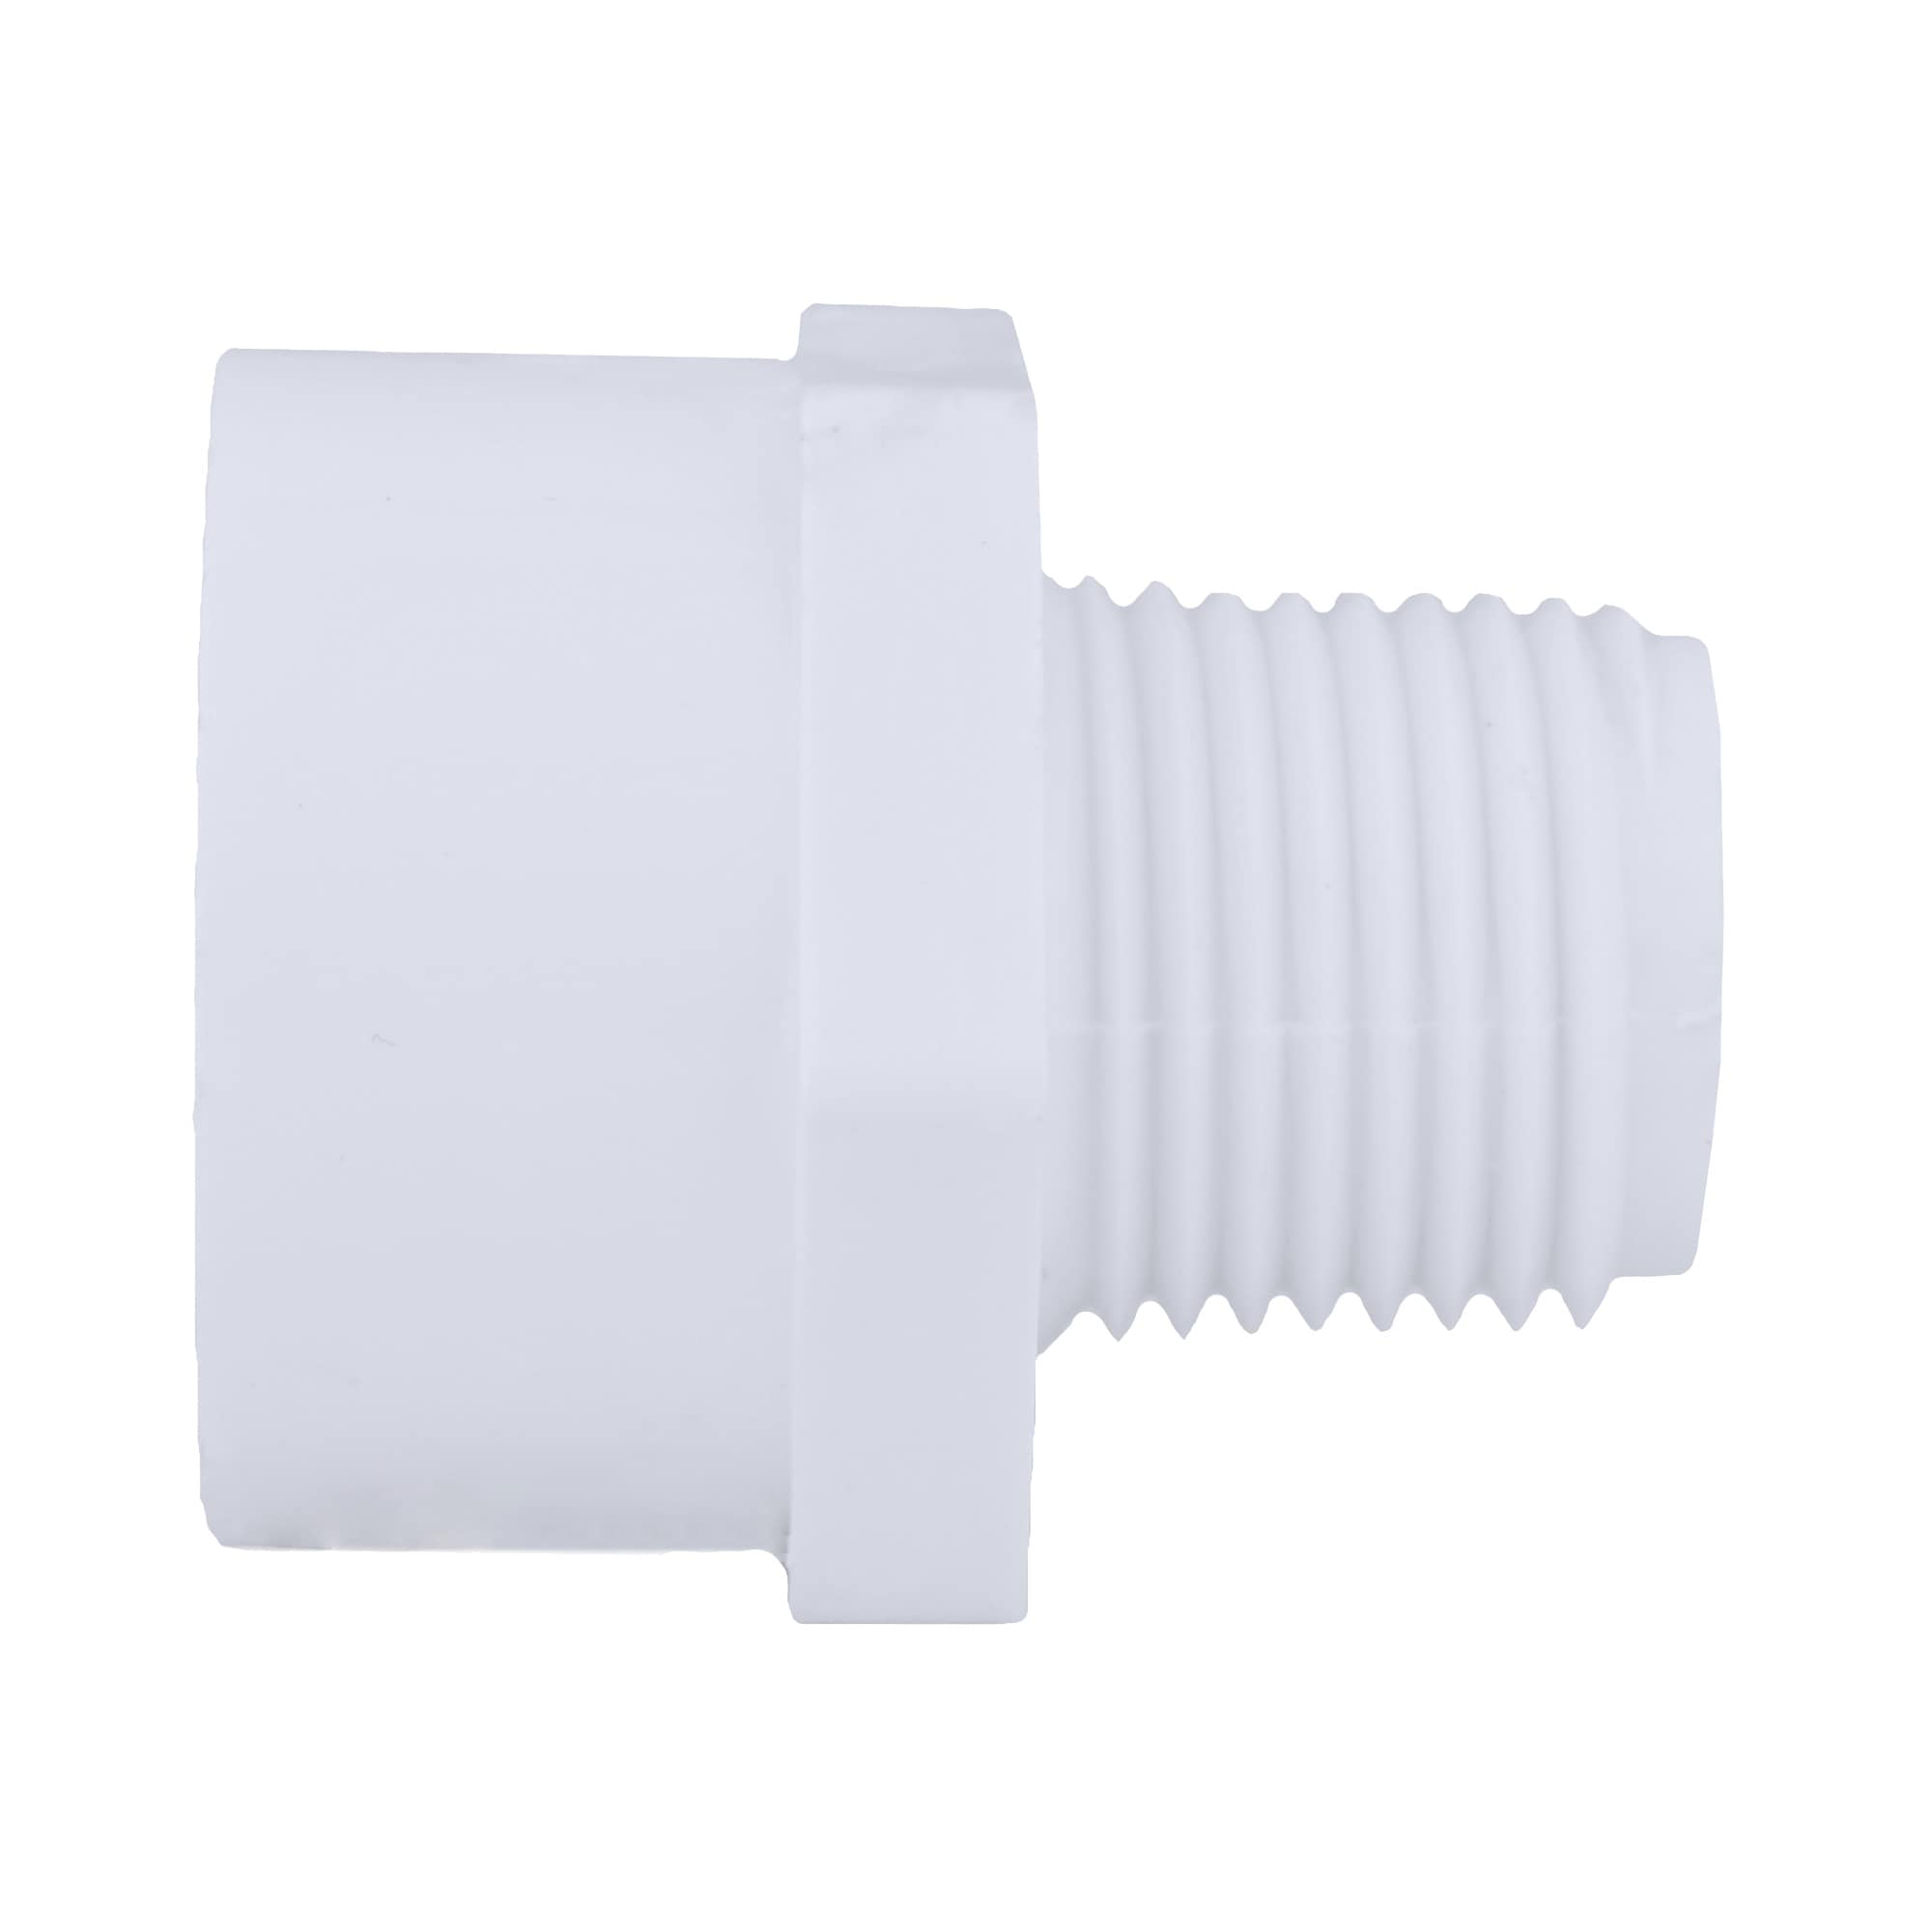 Charlotte Pipe 1 2 In X 3 4 In 600 Psi Schedule 40 White Pvc Adapter In The Pvc Pipe Fittings Department At Lowes Com